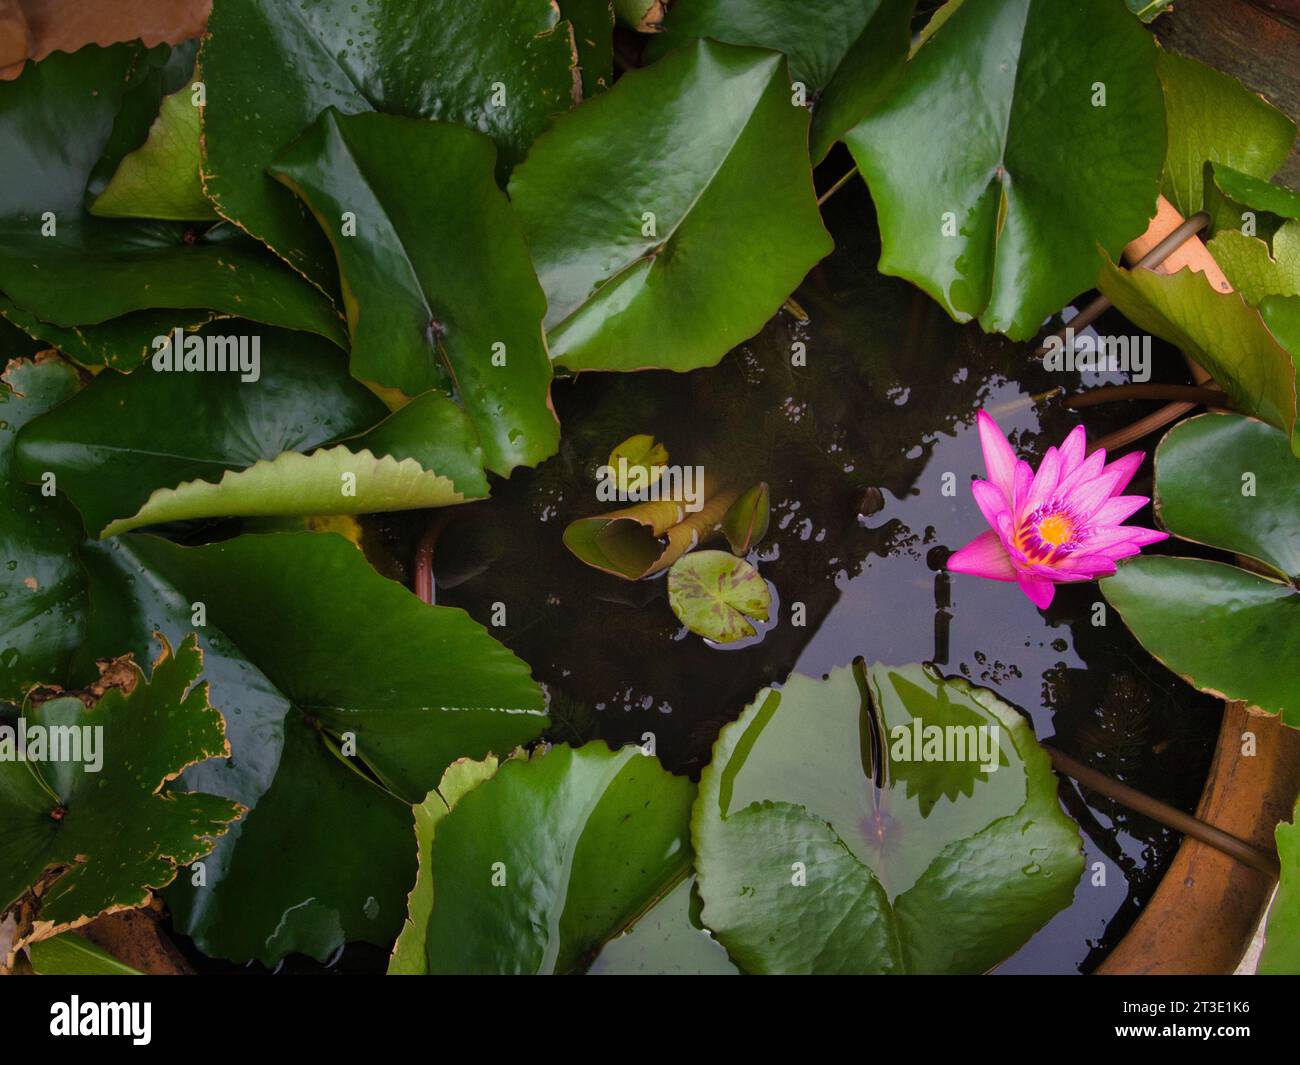 Zen image of top down view of water lily with green leaves & a vivid pink flower in a container pond at a tropical botanical garden in Kauai, Hawaii. Stock Photo